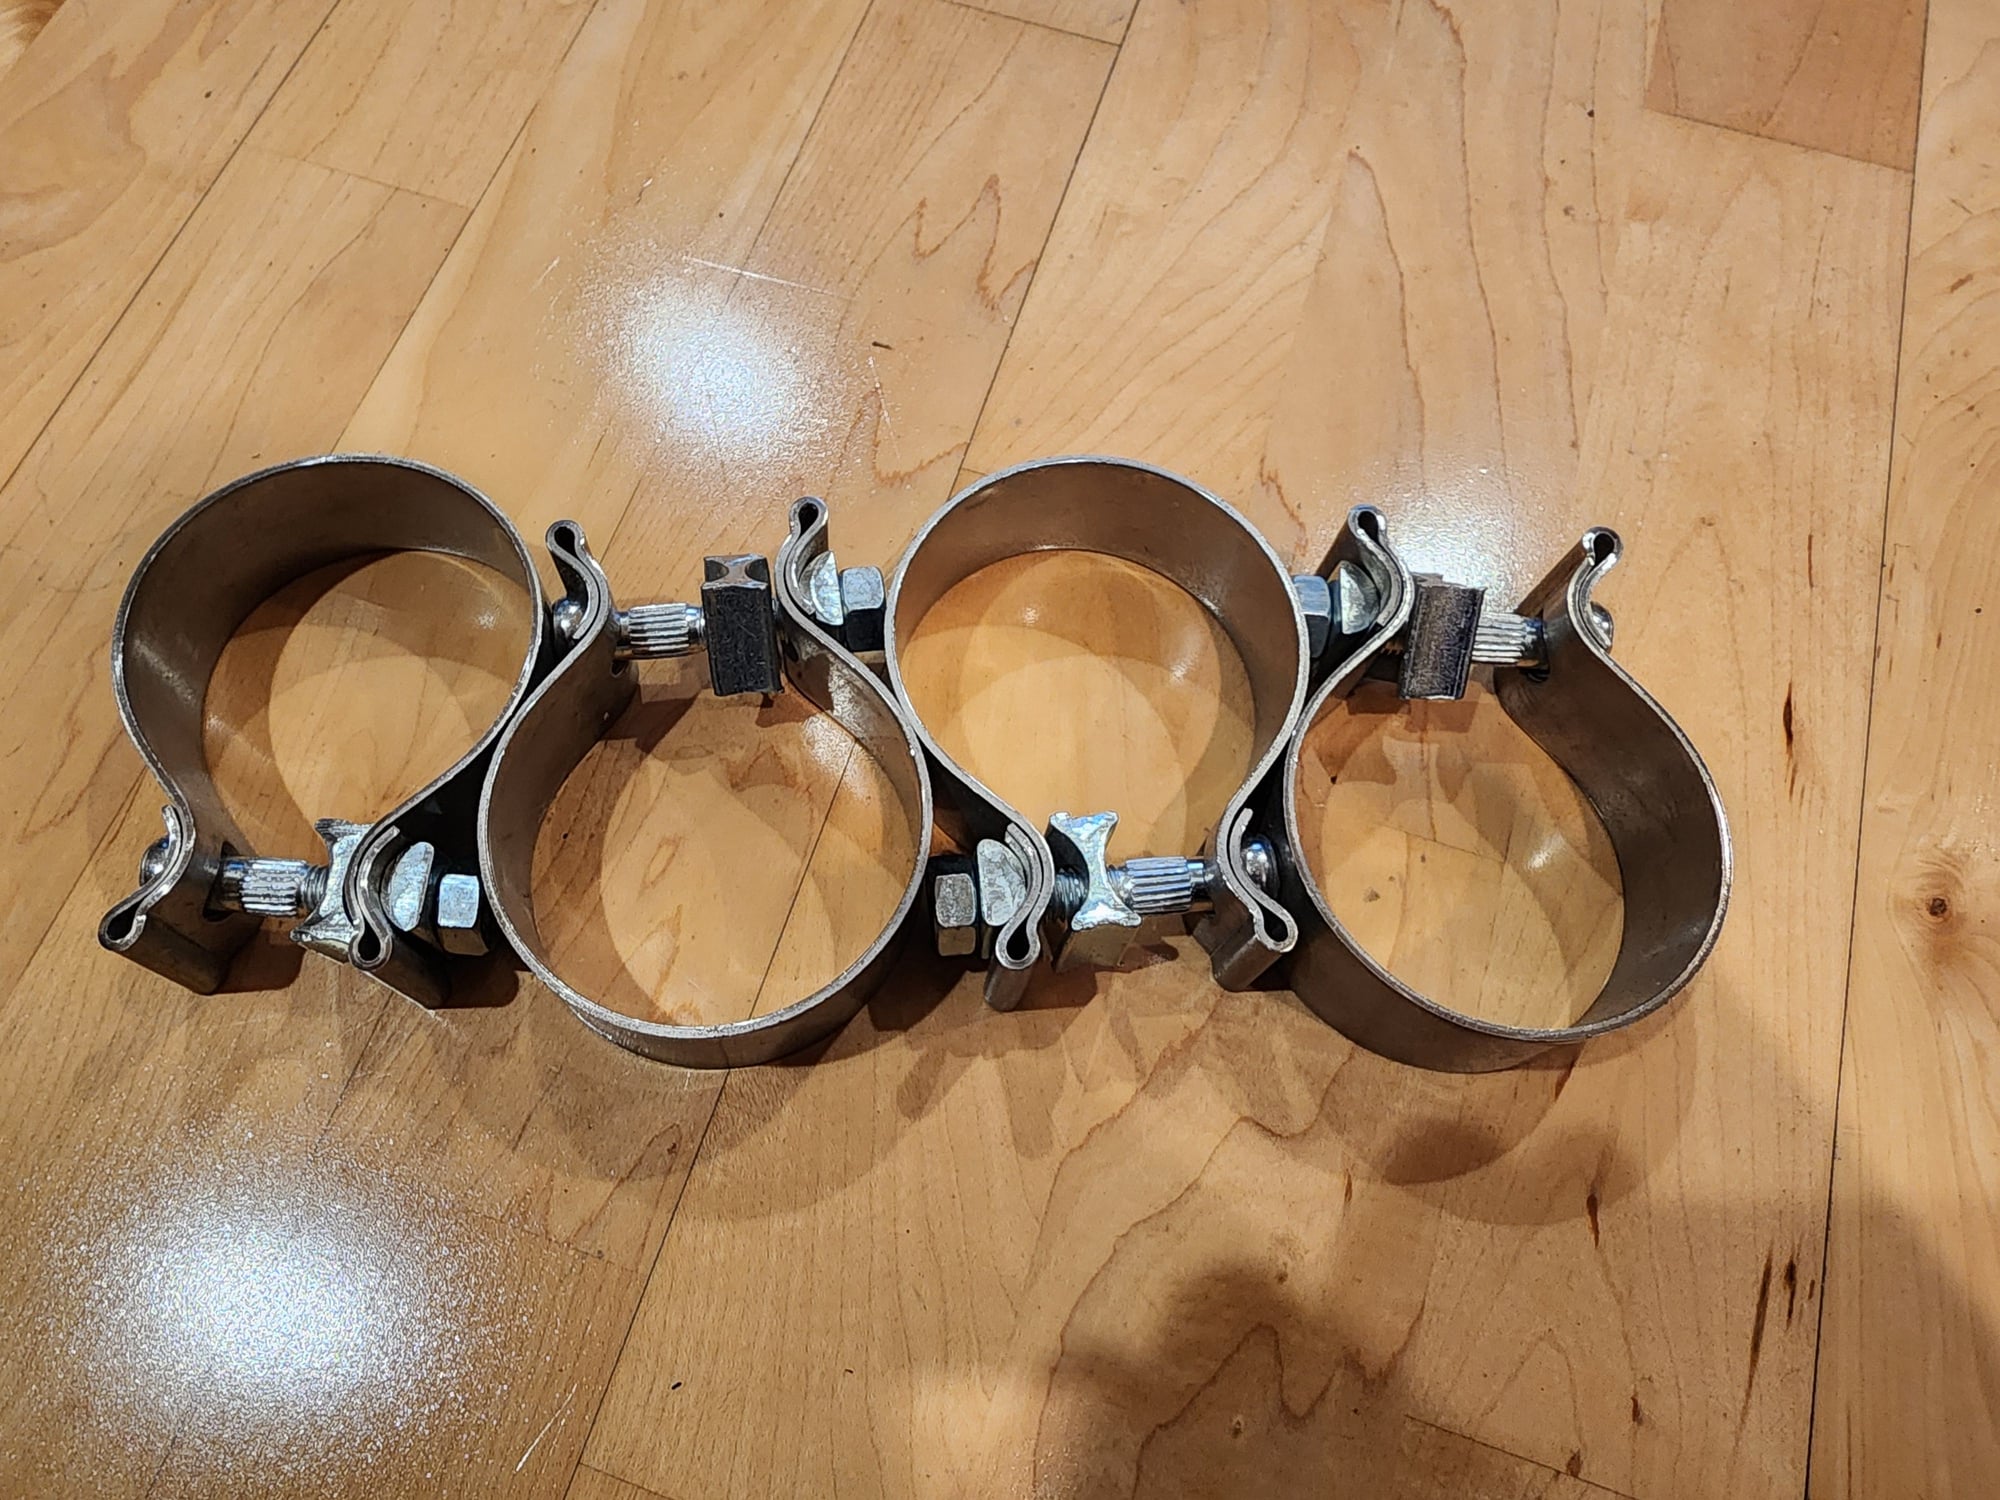 2007 Mercedes-Benz SLK55 AMG - 4x 3.0" Exhaust band clamps (NEW, $20) - Engine - Exhaust - $20 - Altadena, CA 91001, United States